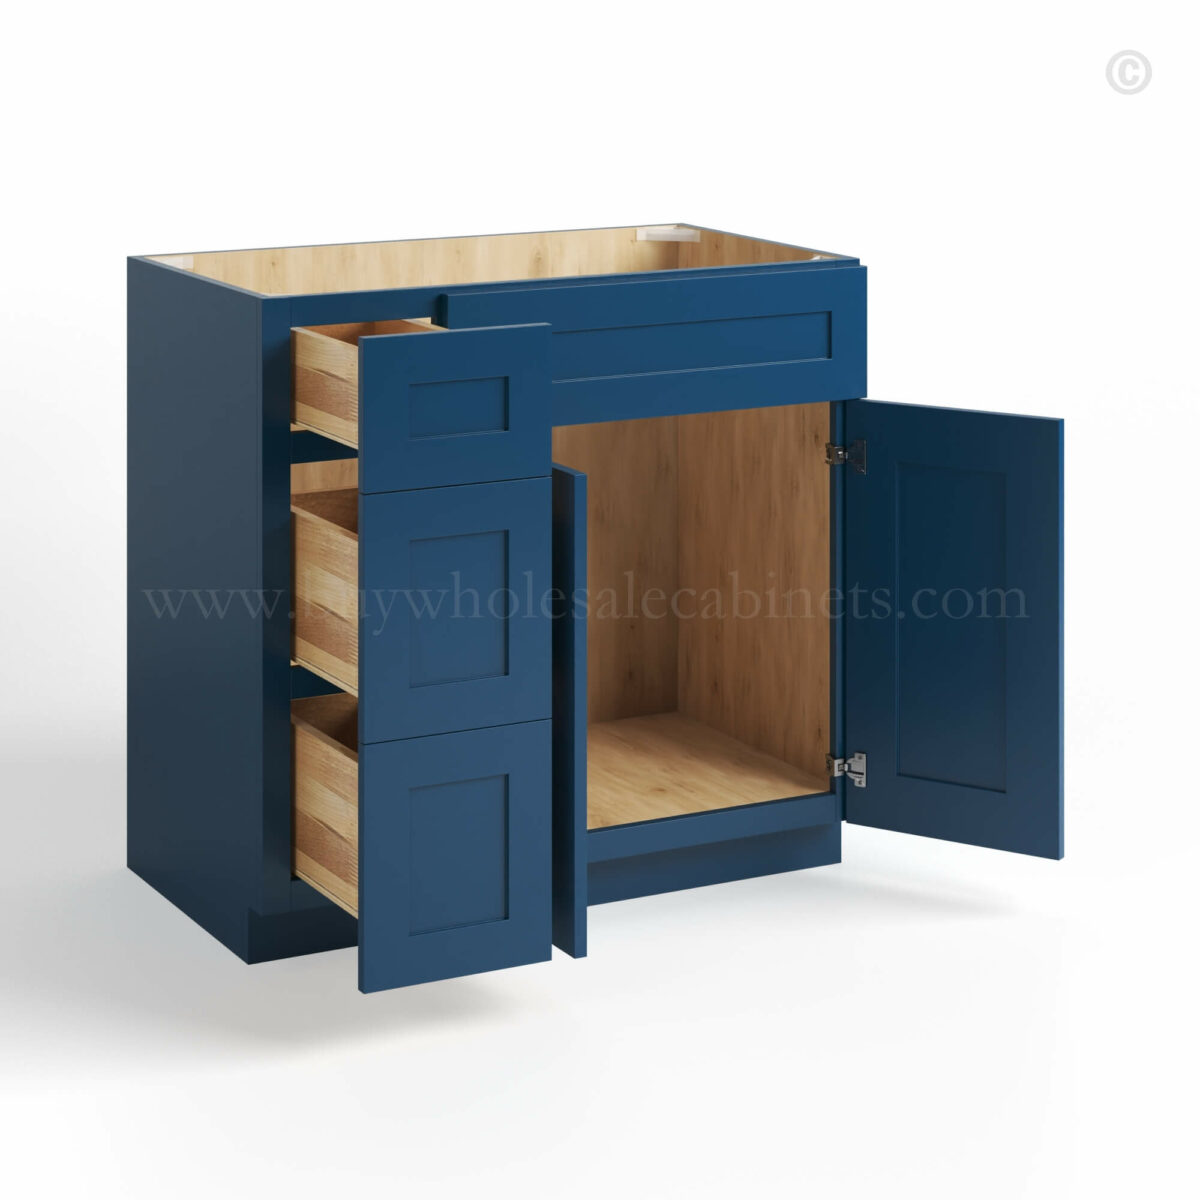 Navy Blue Shaker 36 W Vanity Combo with Drawers